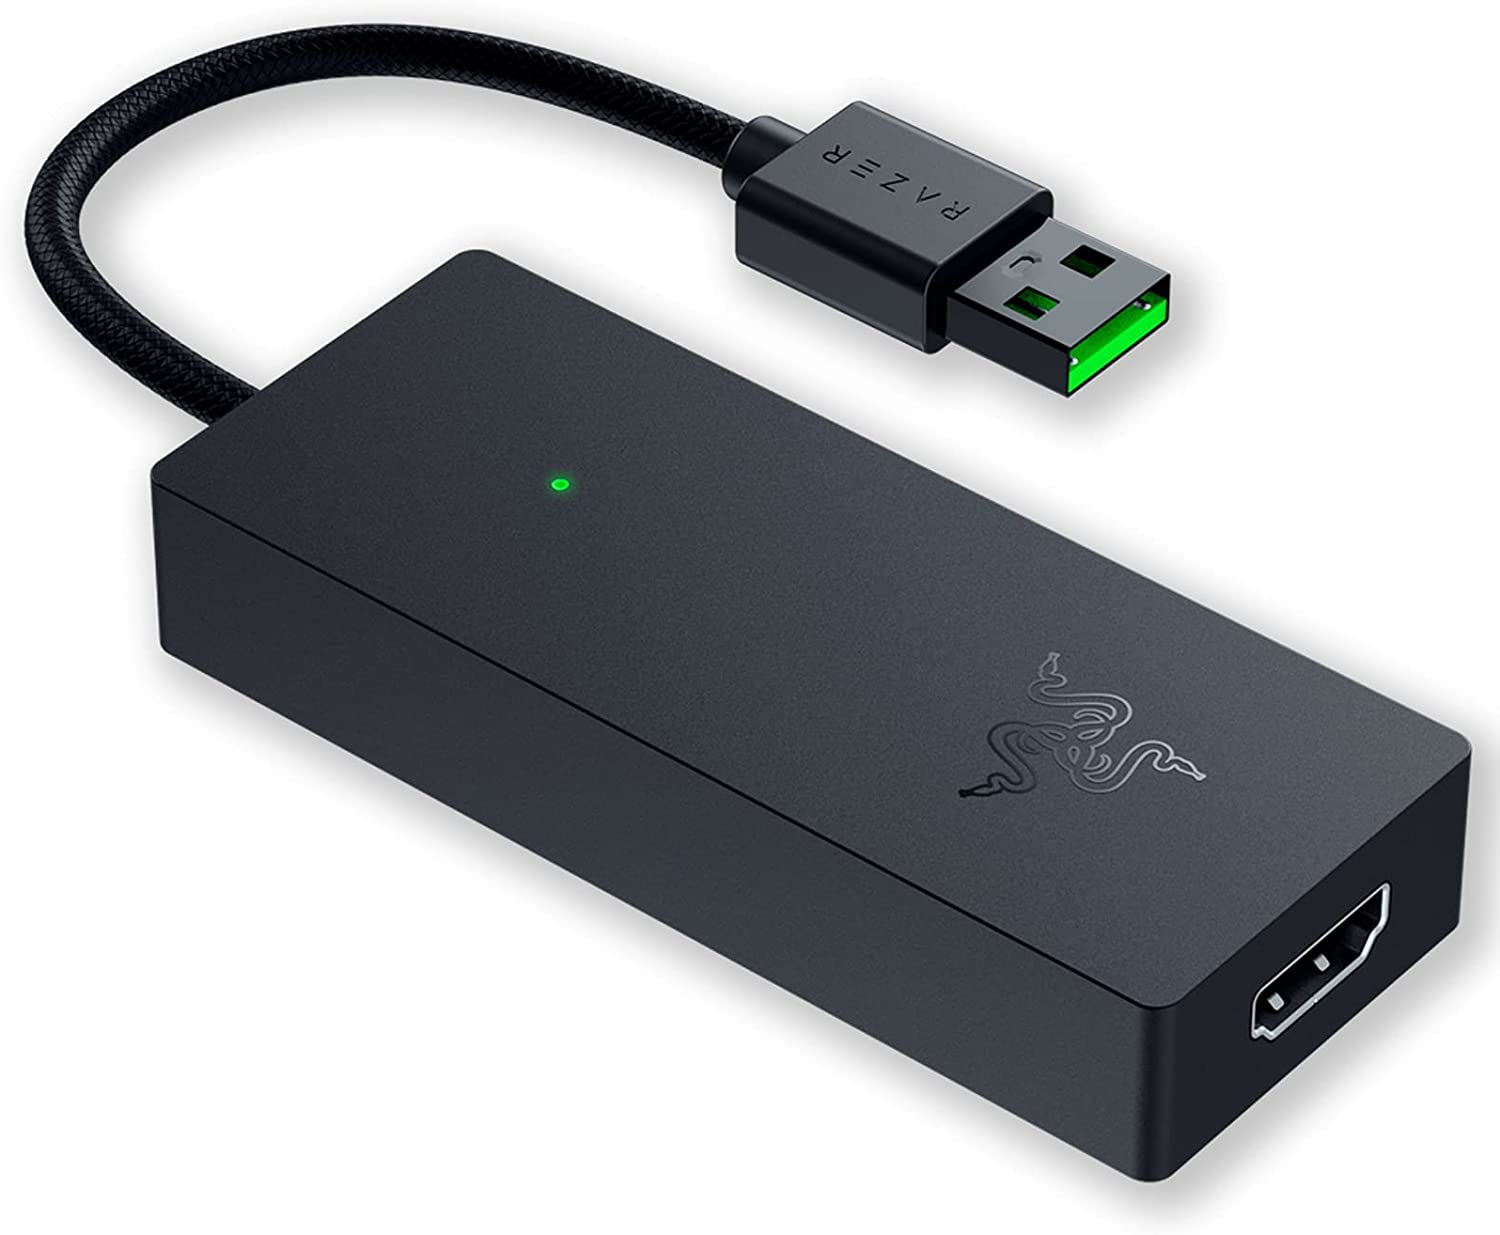 Streamers, pay attention: The Kiyo X webcam and Ripsaw X capture card from Razer are now available